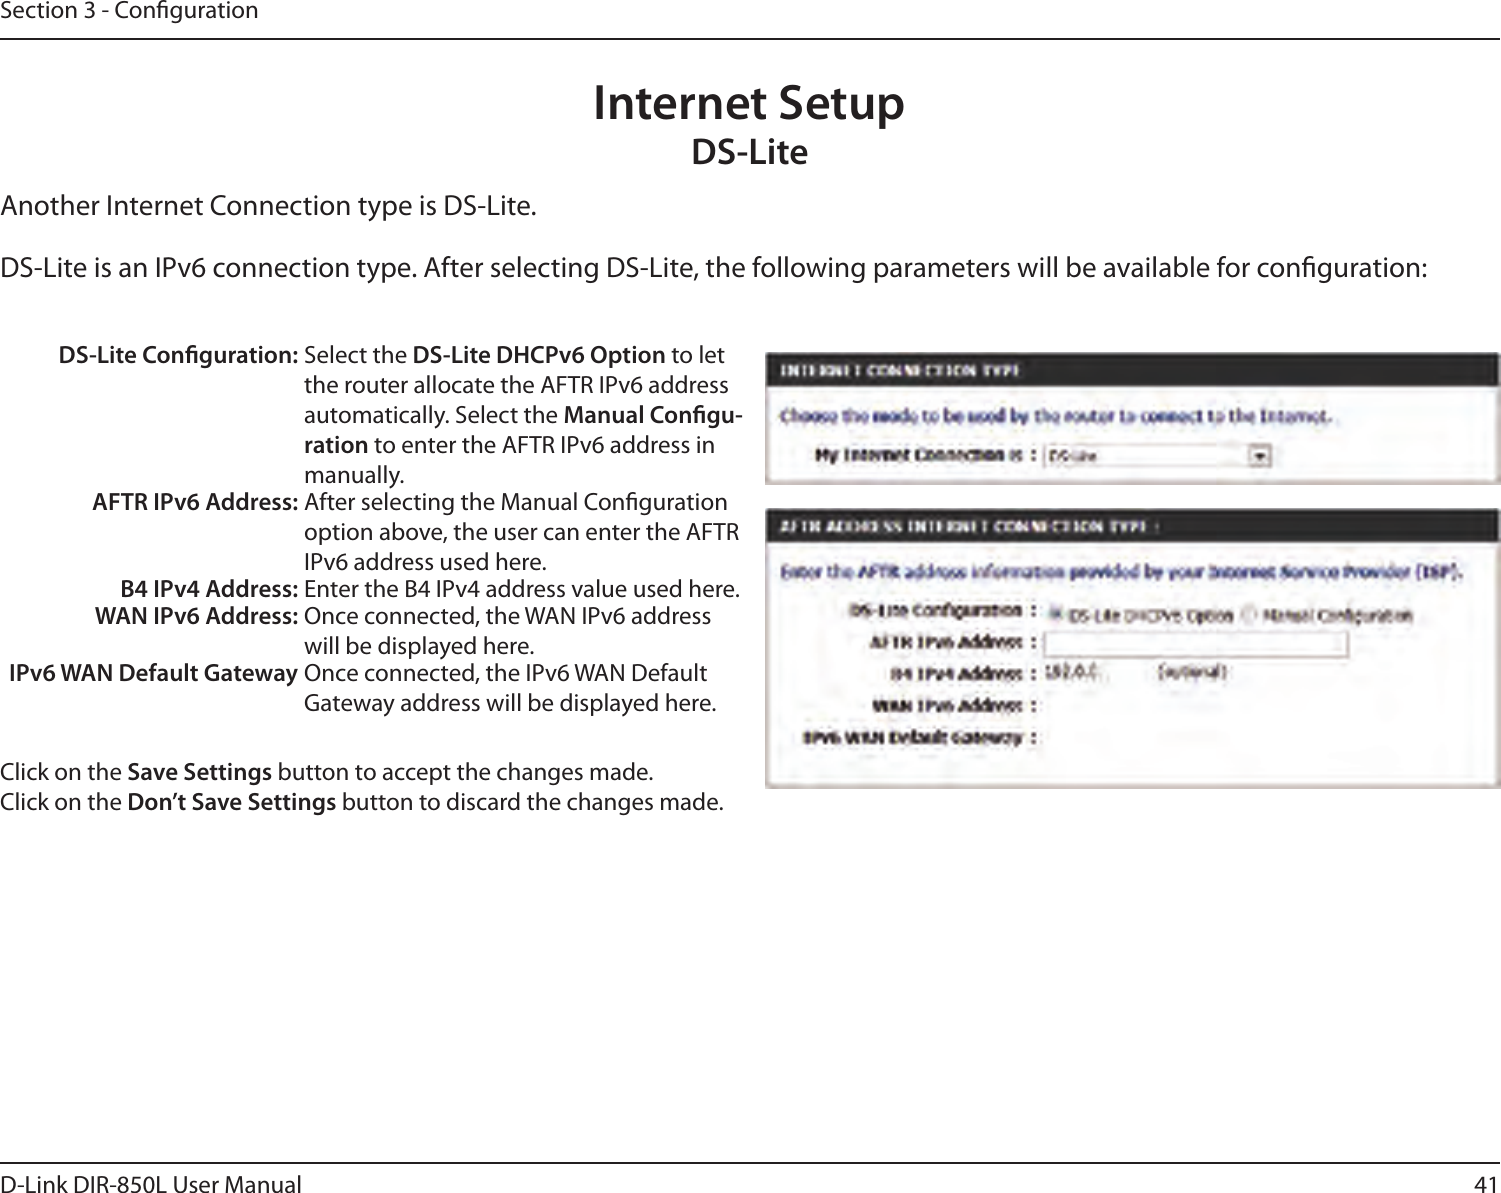 41D-Link DIR-850L User ManualSection 3 - CongurationInternet SetupDS-LiteAnother Internet Connection type is DS-Lite.DS-Lite is an IPv6 connection type. After selecting DS-Lite, the following parameters will be available for conguration:DS-Lite Conguration: Select the DS-Lite DHCPv6 Option to let the router allocate the AFTR IPv6 address automatically. Select the Manual Congu-ration to enter the AFTR IPv6 address in manually.AFTR IPv6 Address: After selecting the Manual Conguration option above, the user can enter the AFTR IPv6 address used here.B4 IPv4 Address: Enter the B4 IPv4 address value used here.WAN IPv6 Address: Once connected, the WAN IPv6 address will be displayed here.IPv6 WAN Default Gateway Once connected, the IPv6 WAN Default Gateway address will be displayed here.Click on the Save Settings button to accept the changes made.Click on the Don’t Save Settings button to discard the changes made.